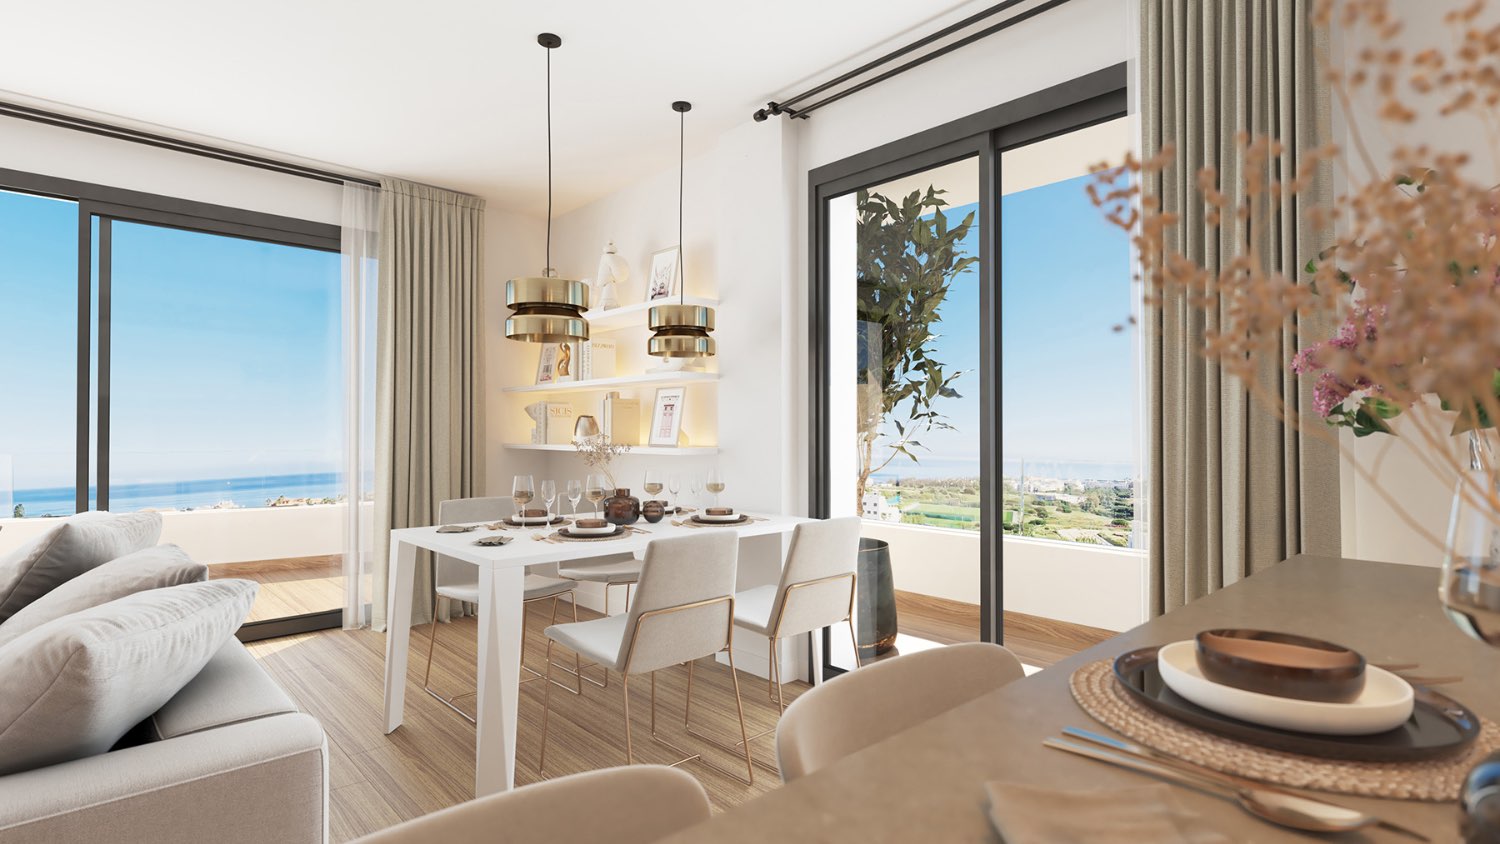 New Penthouse Promotion in Estepona - Costa del Sol